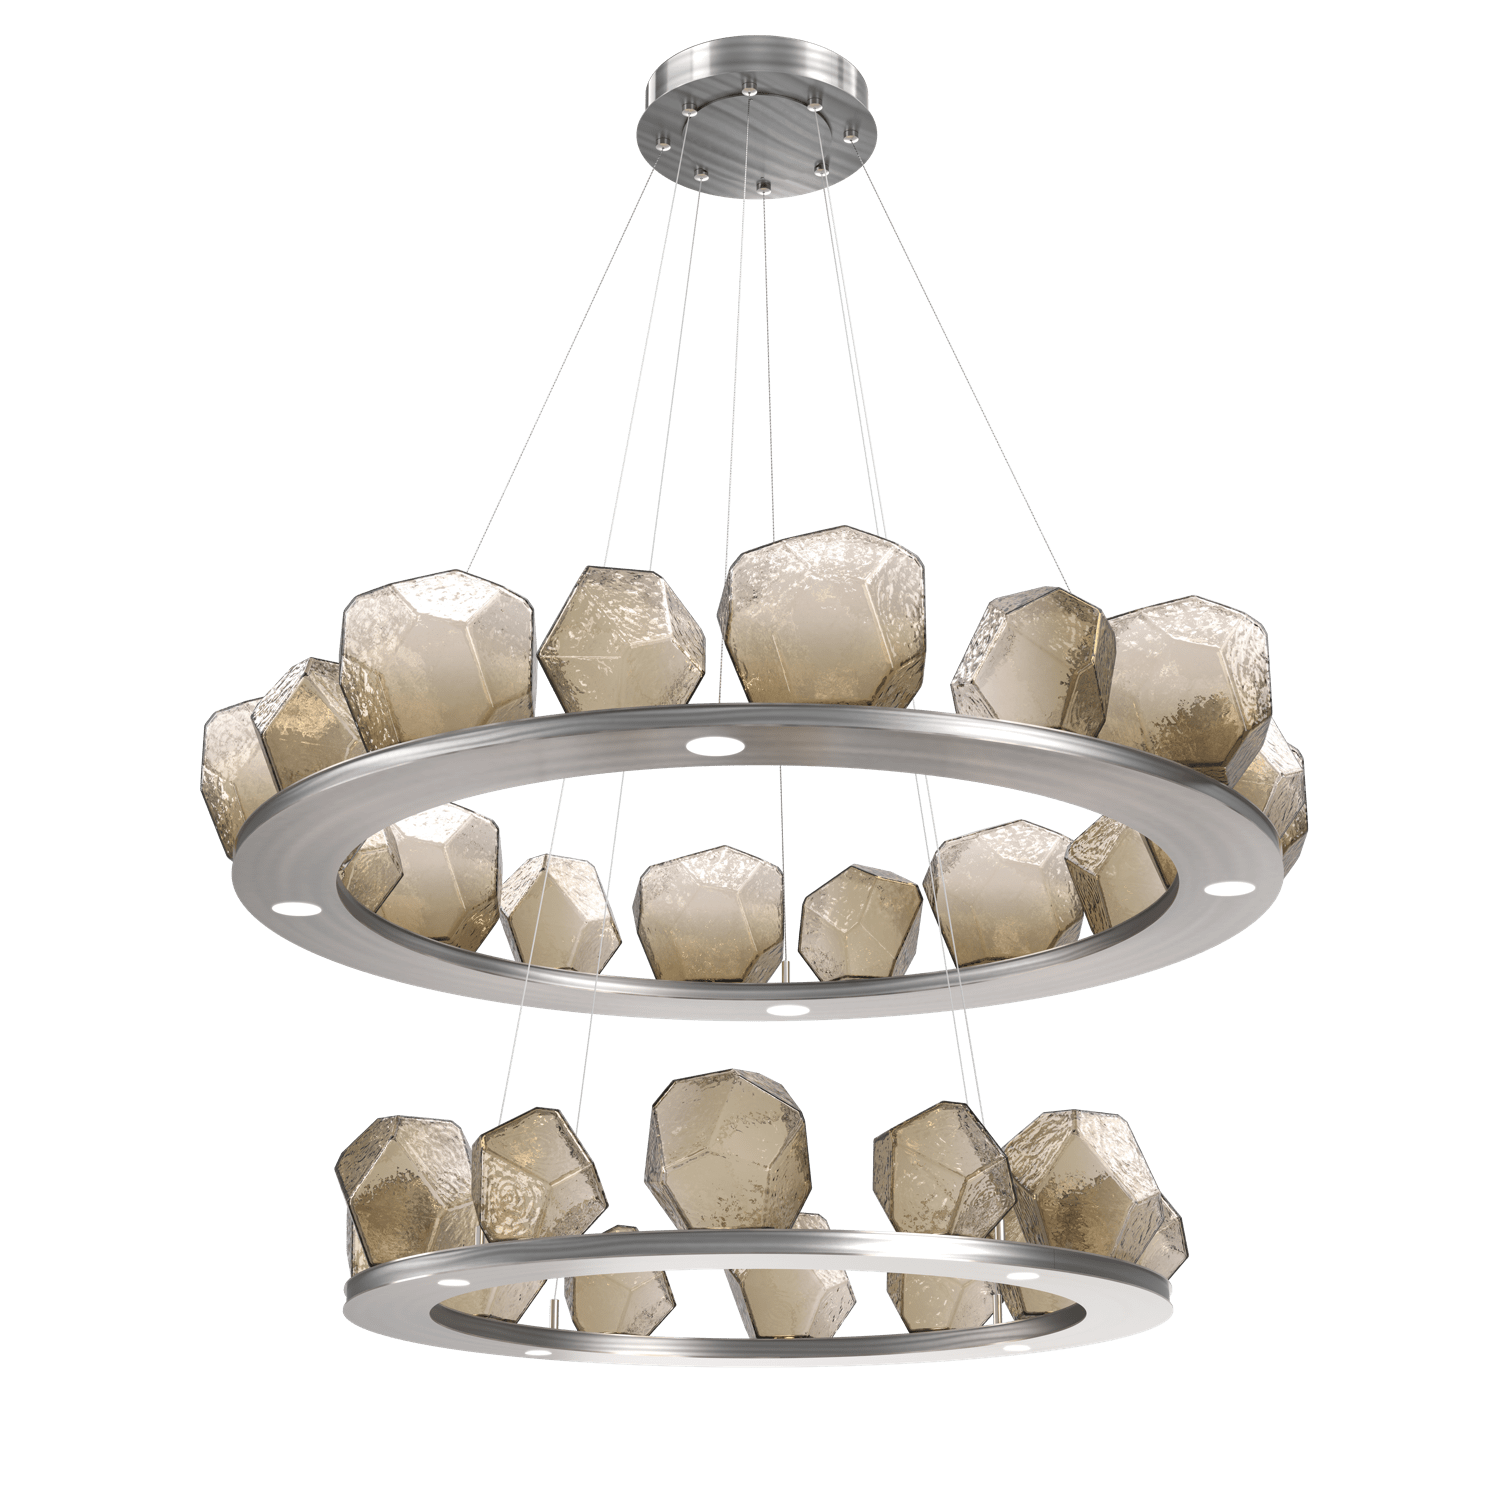 CHB0039-2B-GM-B-Hammerton-Studio-Gem-48-inch-two-tier-ring-chandelier-with-gunmetal-finish-and-bronze-blown-glass-shades-and-LED-lamping